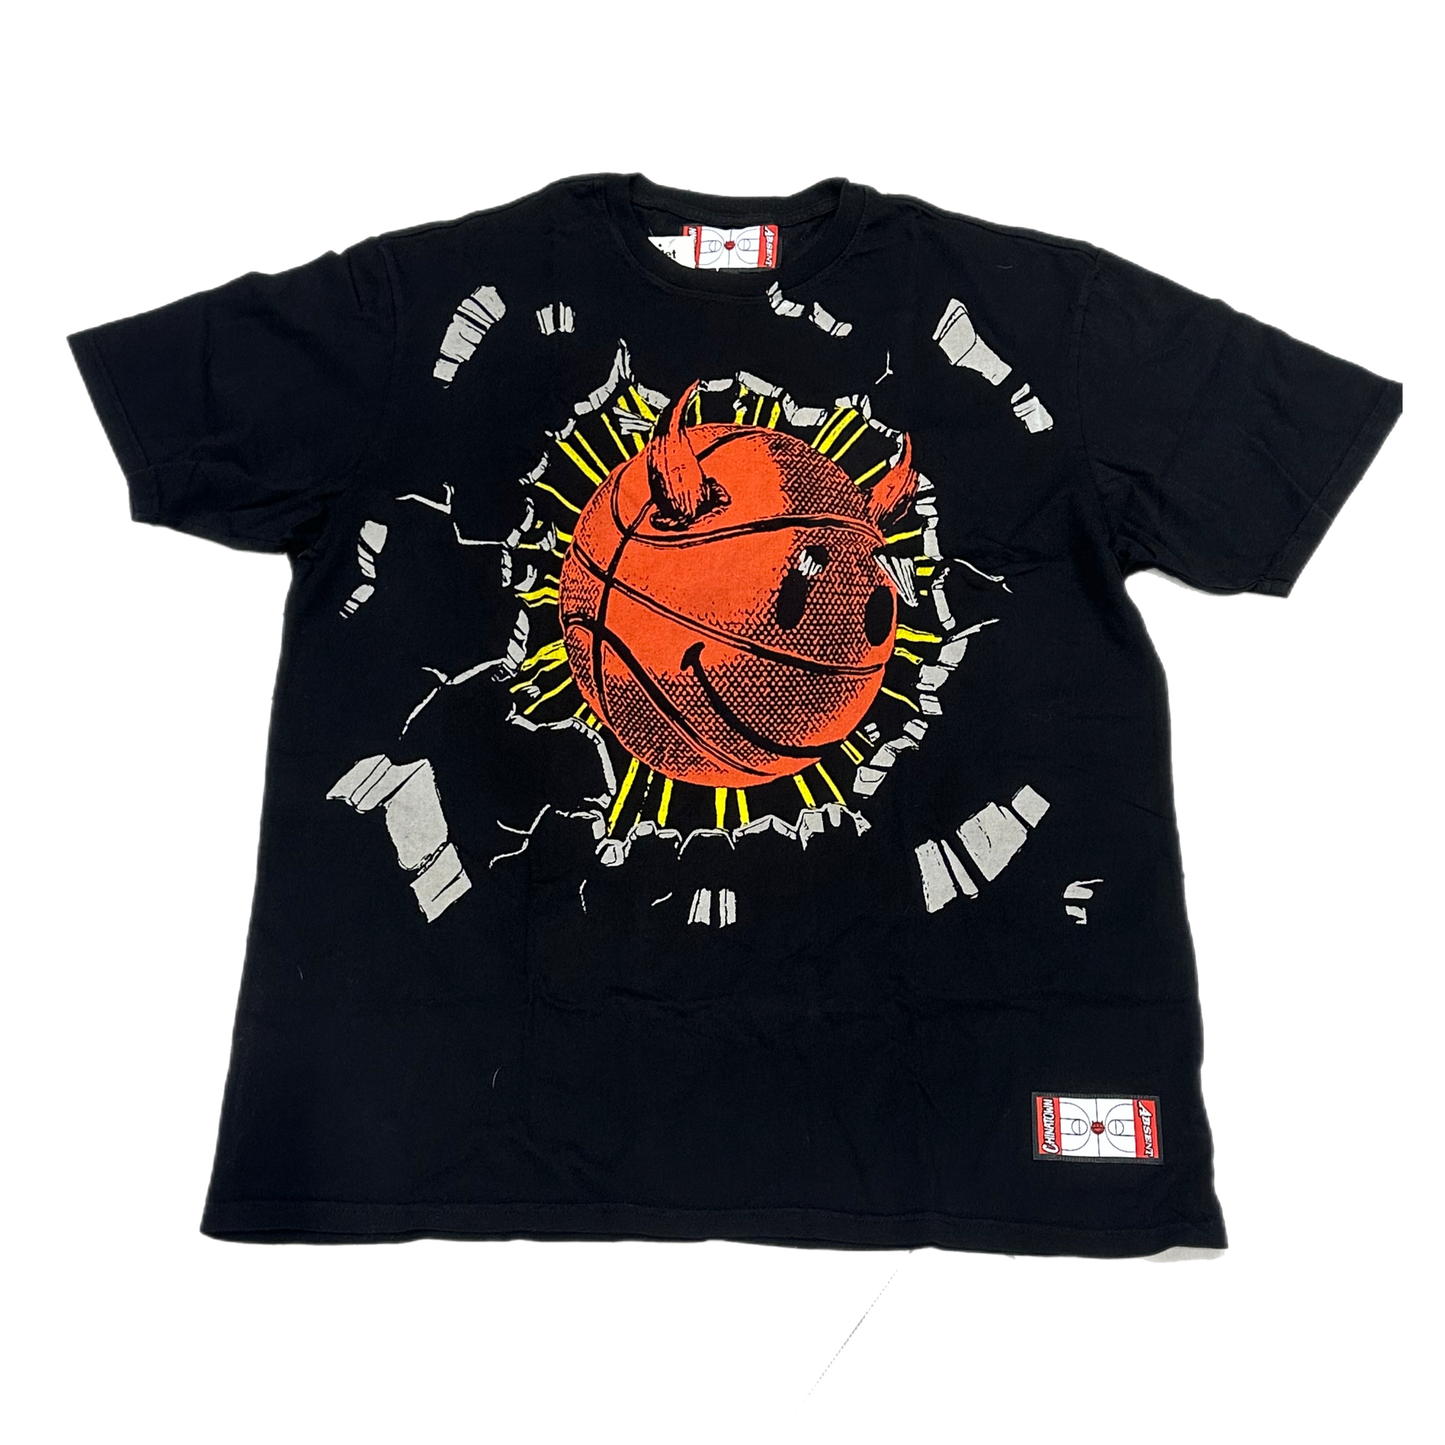 Chinatown Market -"Absent Devil Ball Black Tee"- Size XX-Large